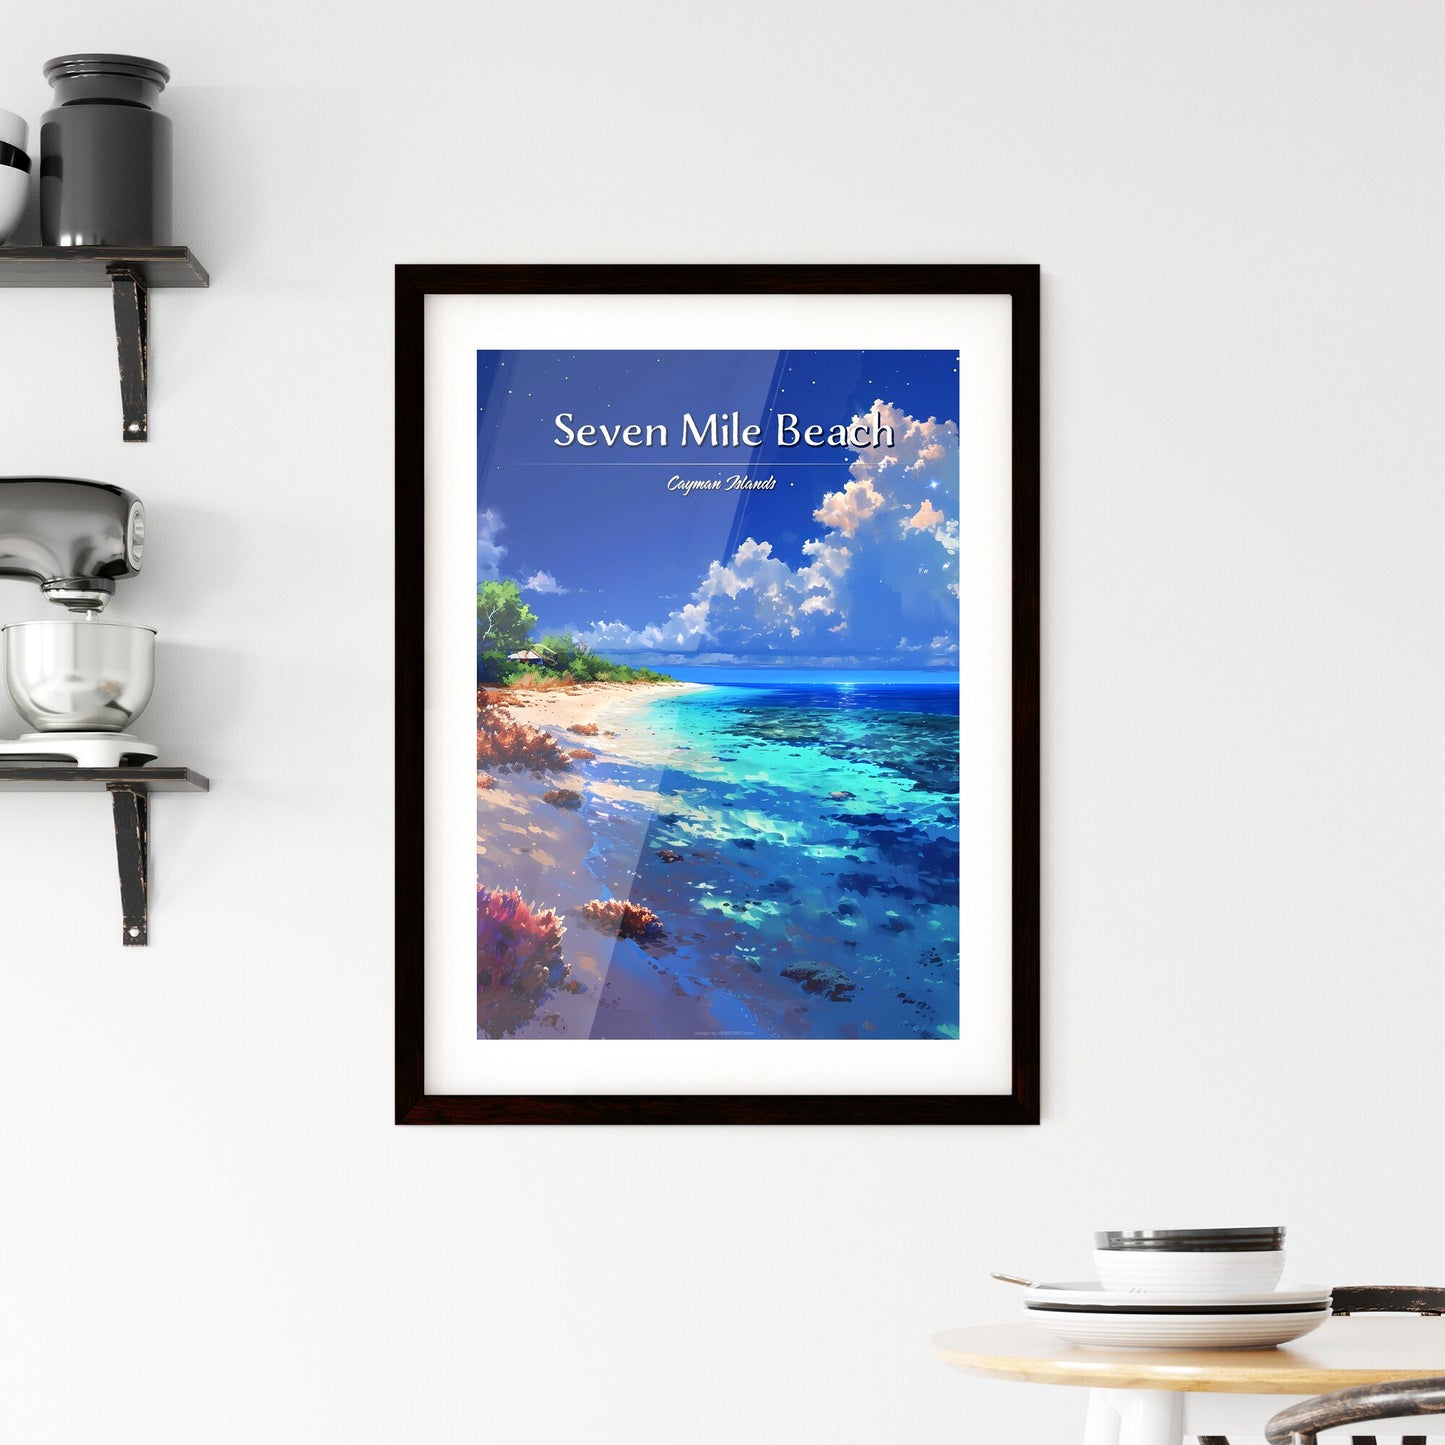 Seven Mile Beach, Cayman Islands - Art print of a beach with trees and blue water Default Title